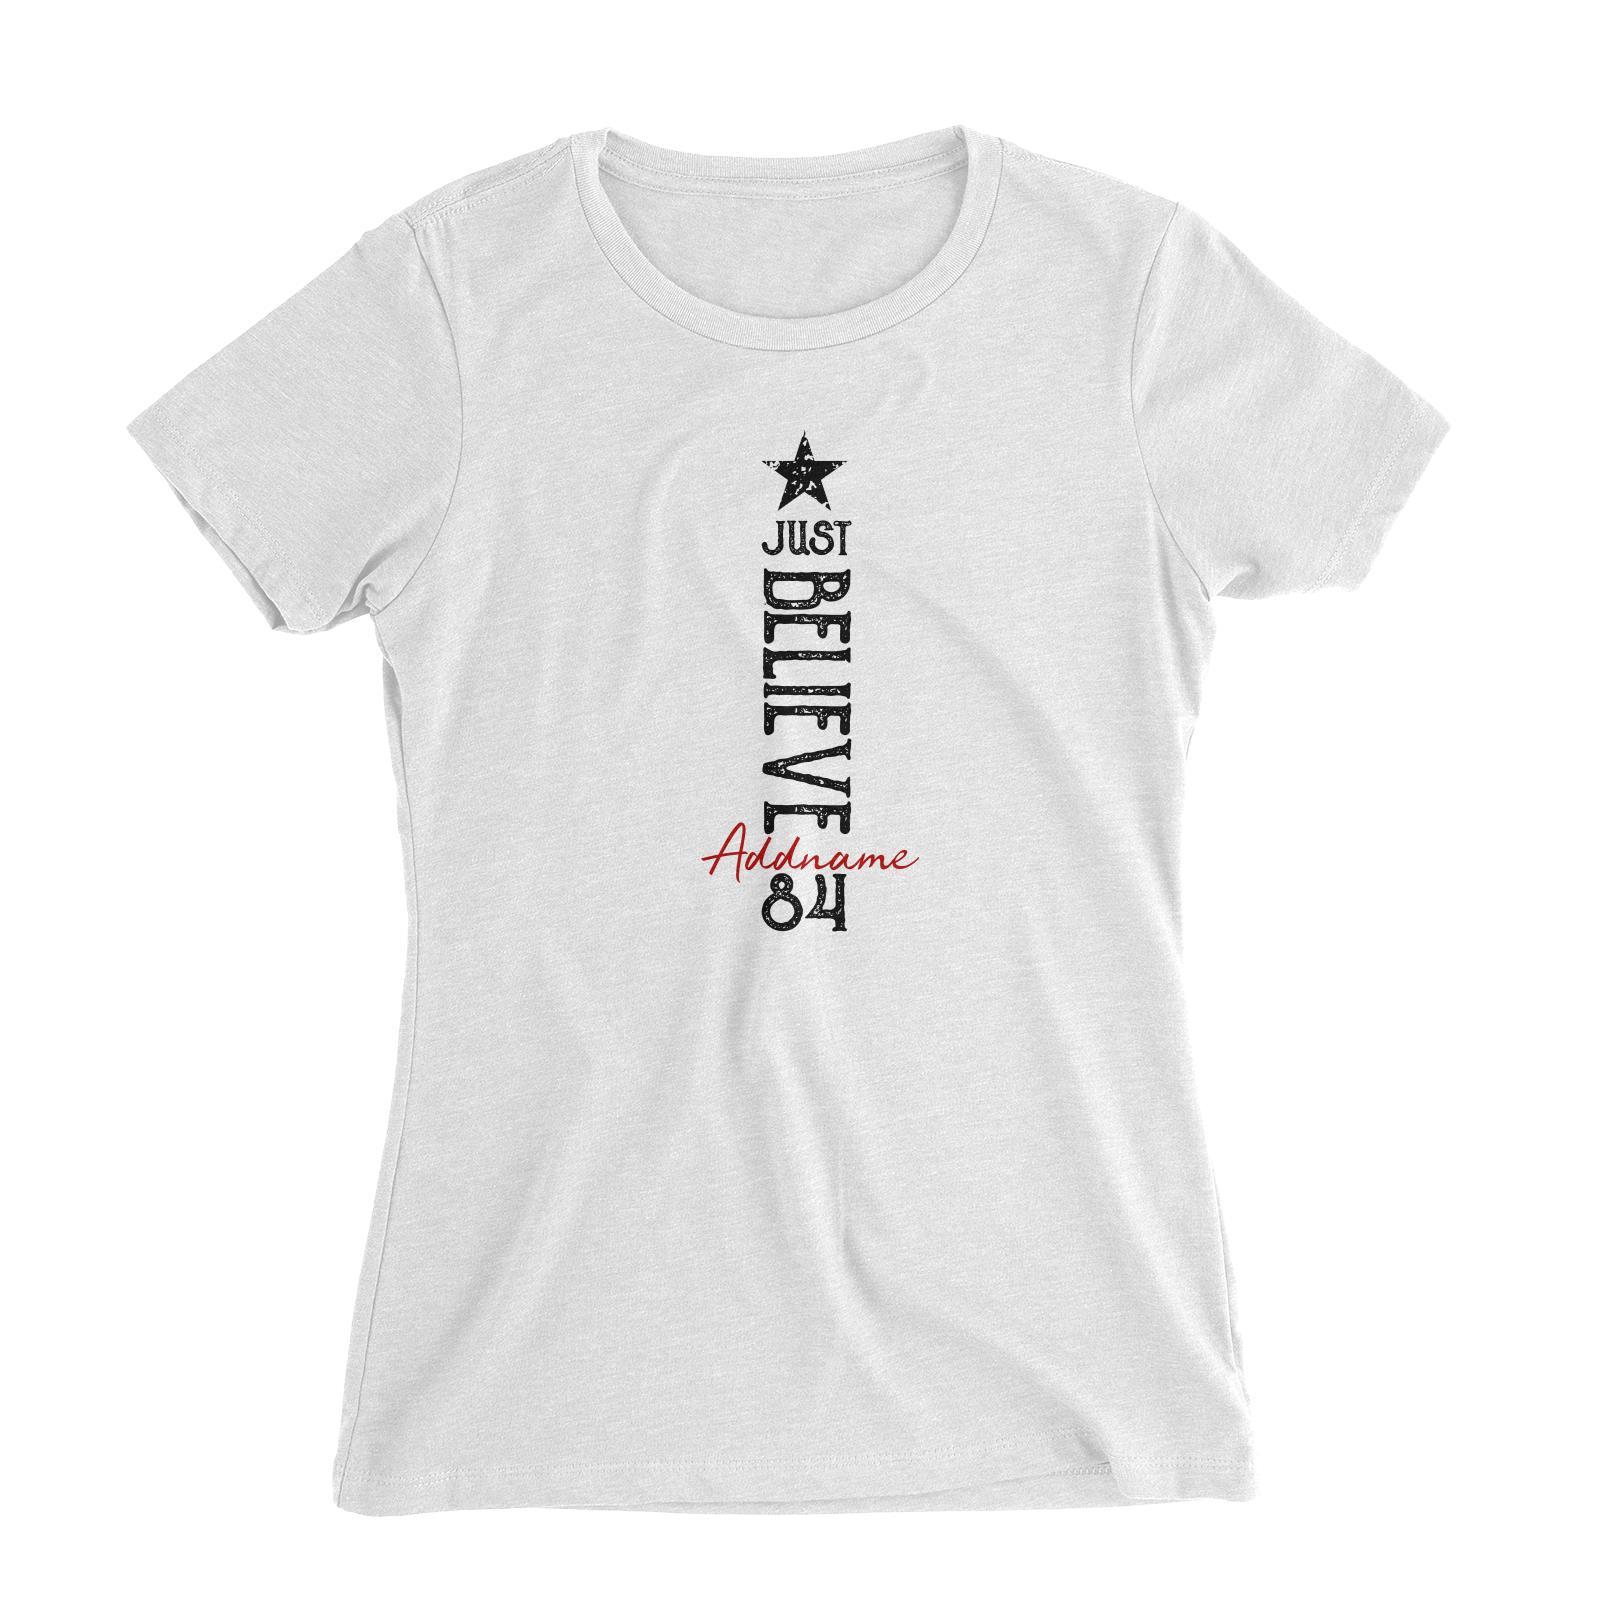 Just Believe Personalizable with Name and Number Women's Slim Fit T-Shirt